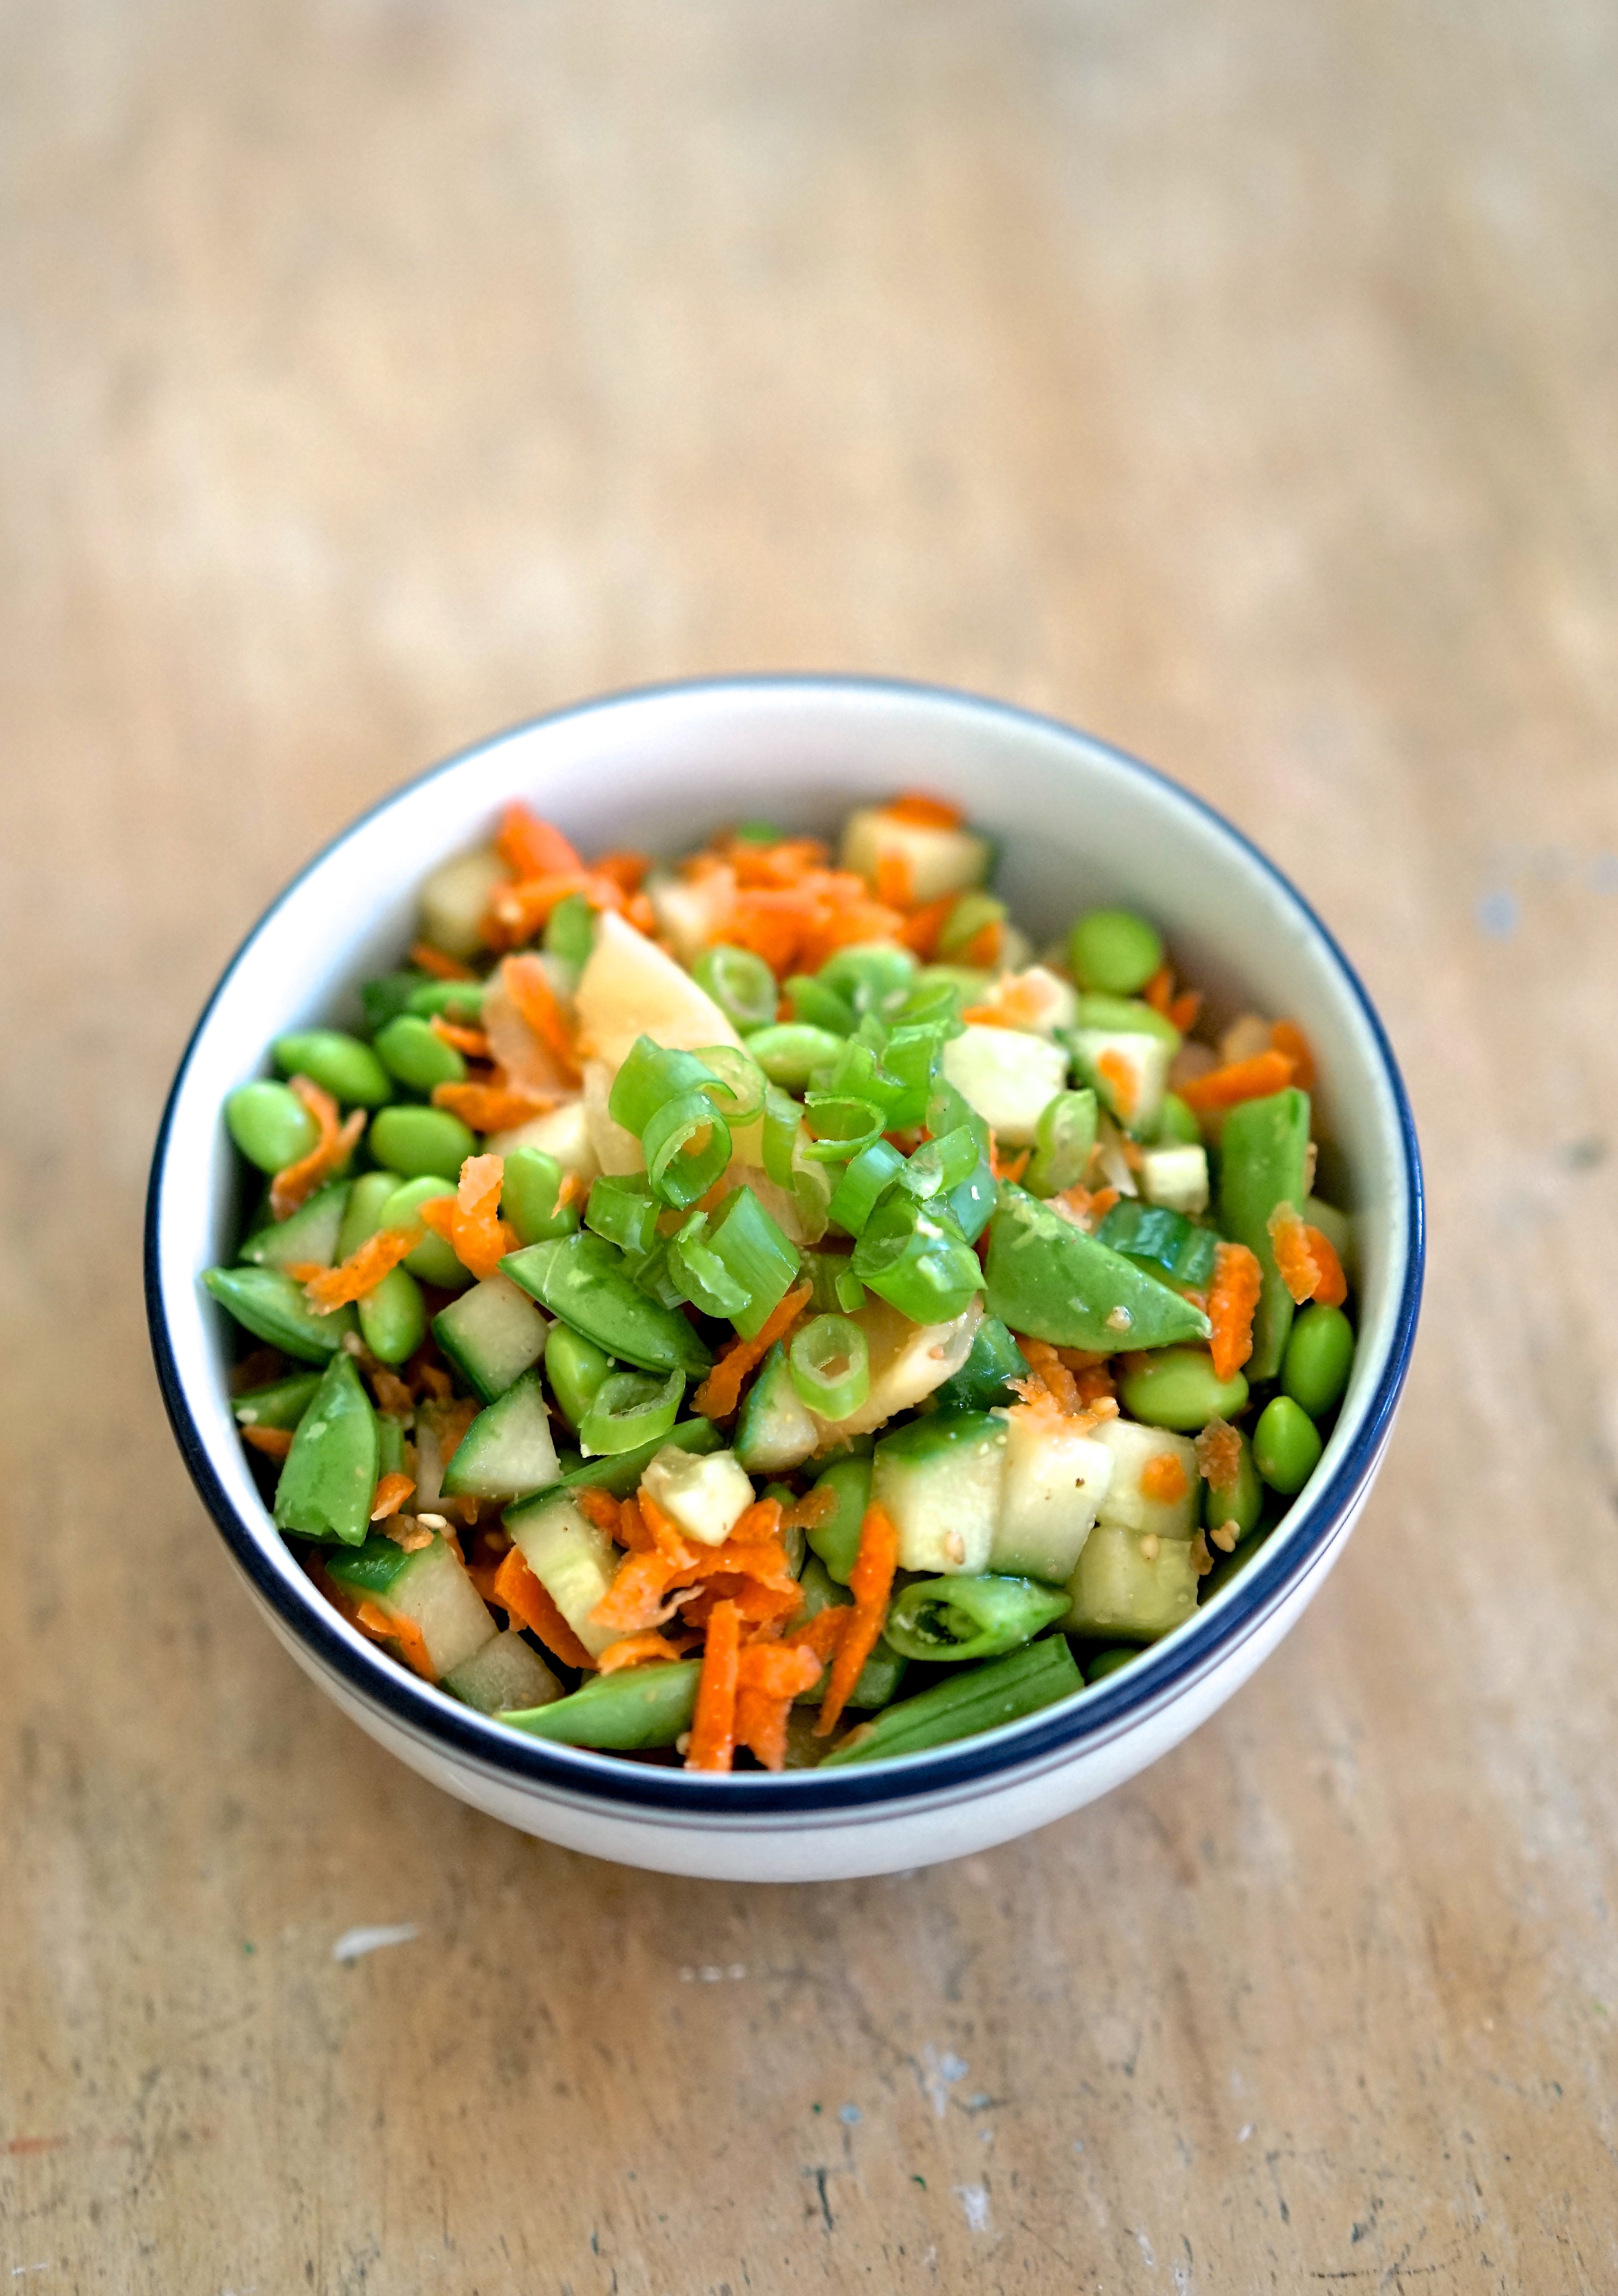 Ginger Vegetables & Edamame with Sesame | Living Healthy in Seattle